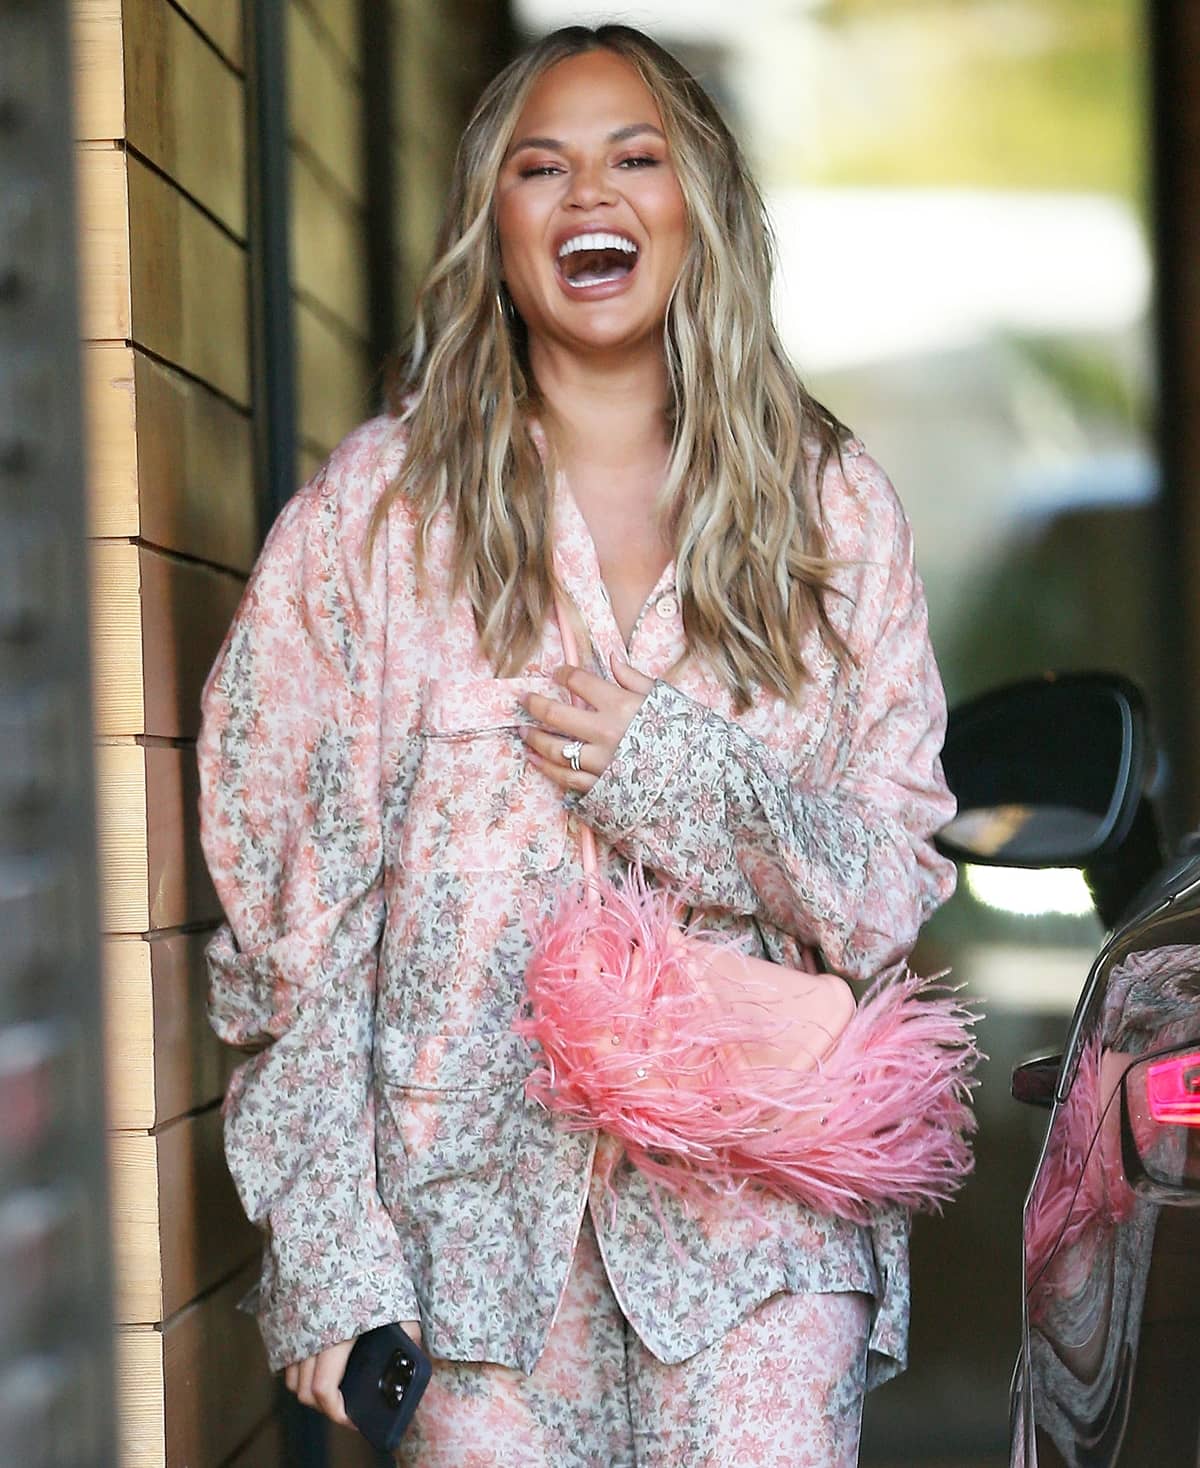 Chrissy Teigen shows everyone how happy she is with Bottega Veneta's pink beak feather-trimmed studded leather clutch